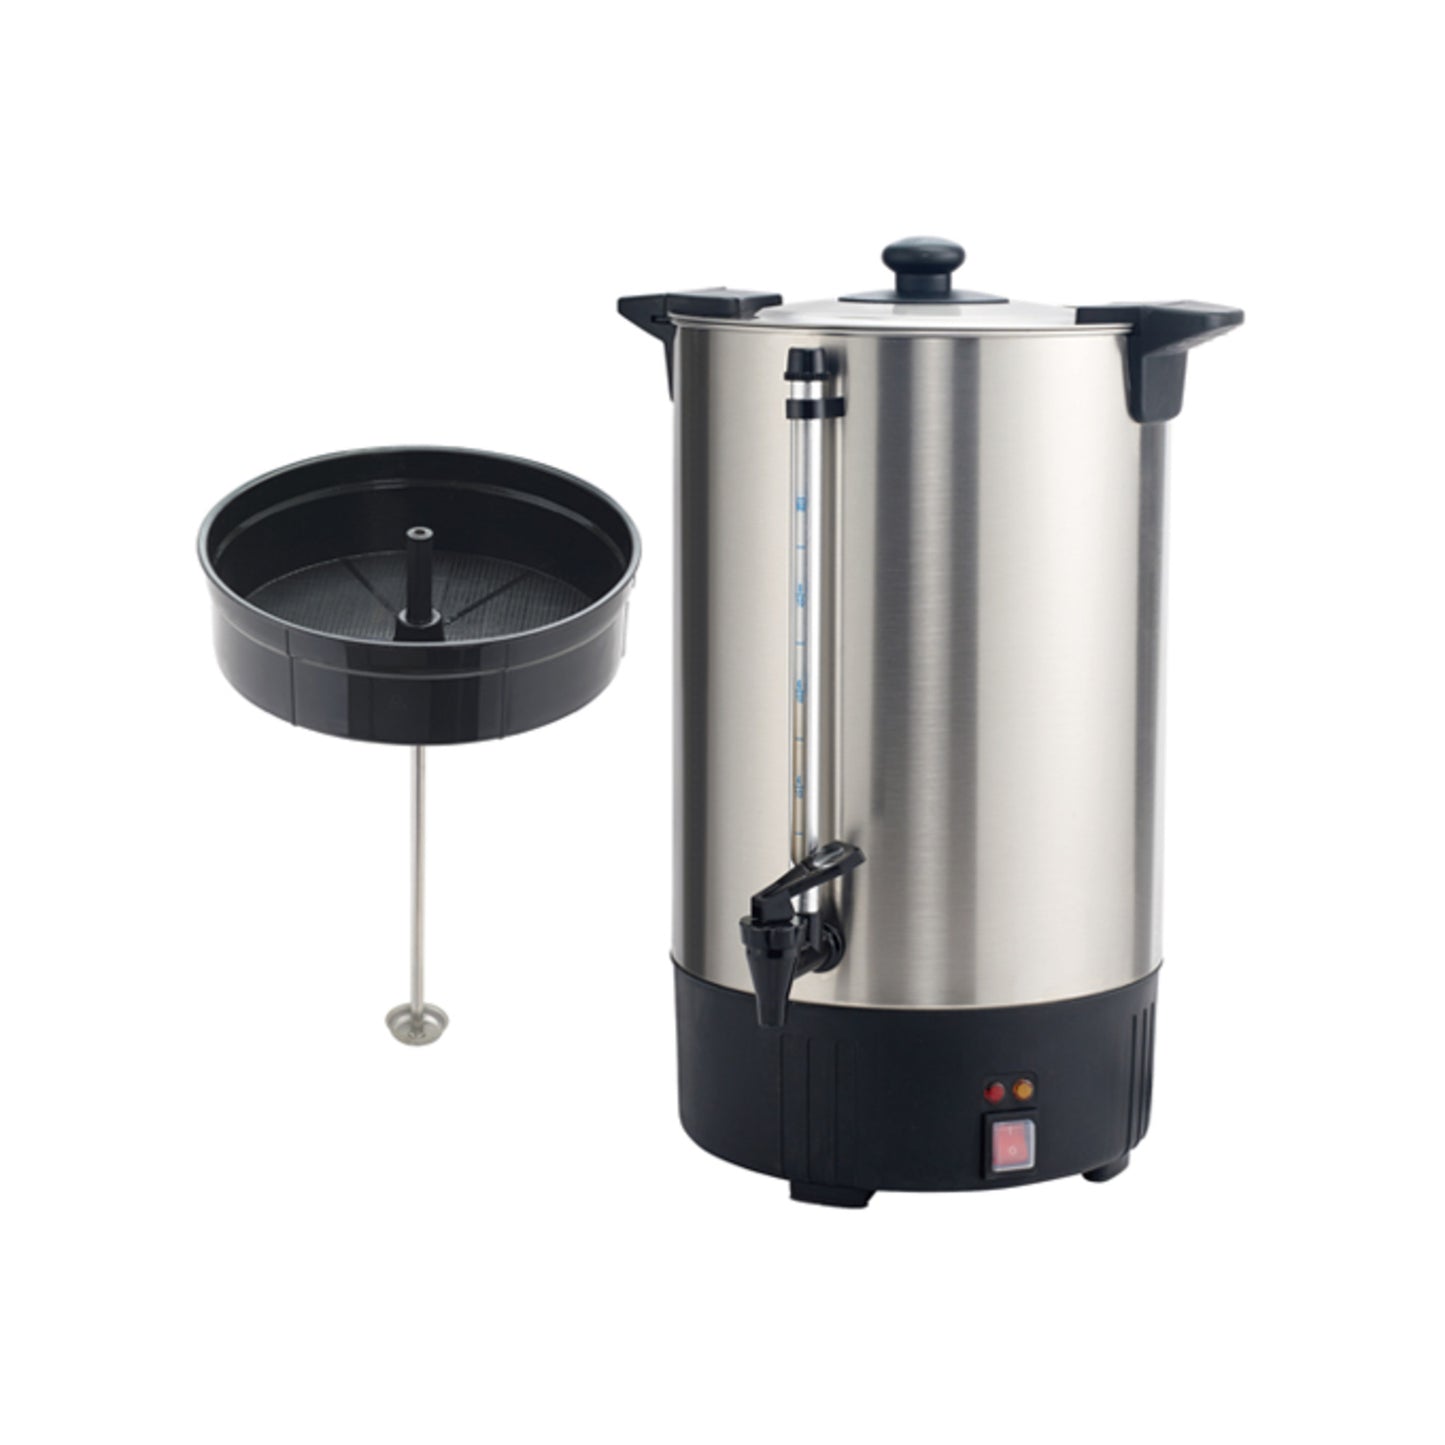 ECU-100A - Electric Stainless Steel Coffee Urn - 100-Cup (16L)